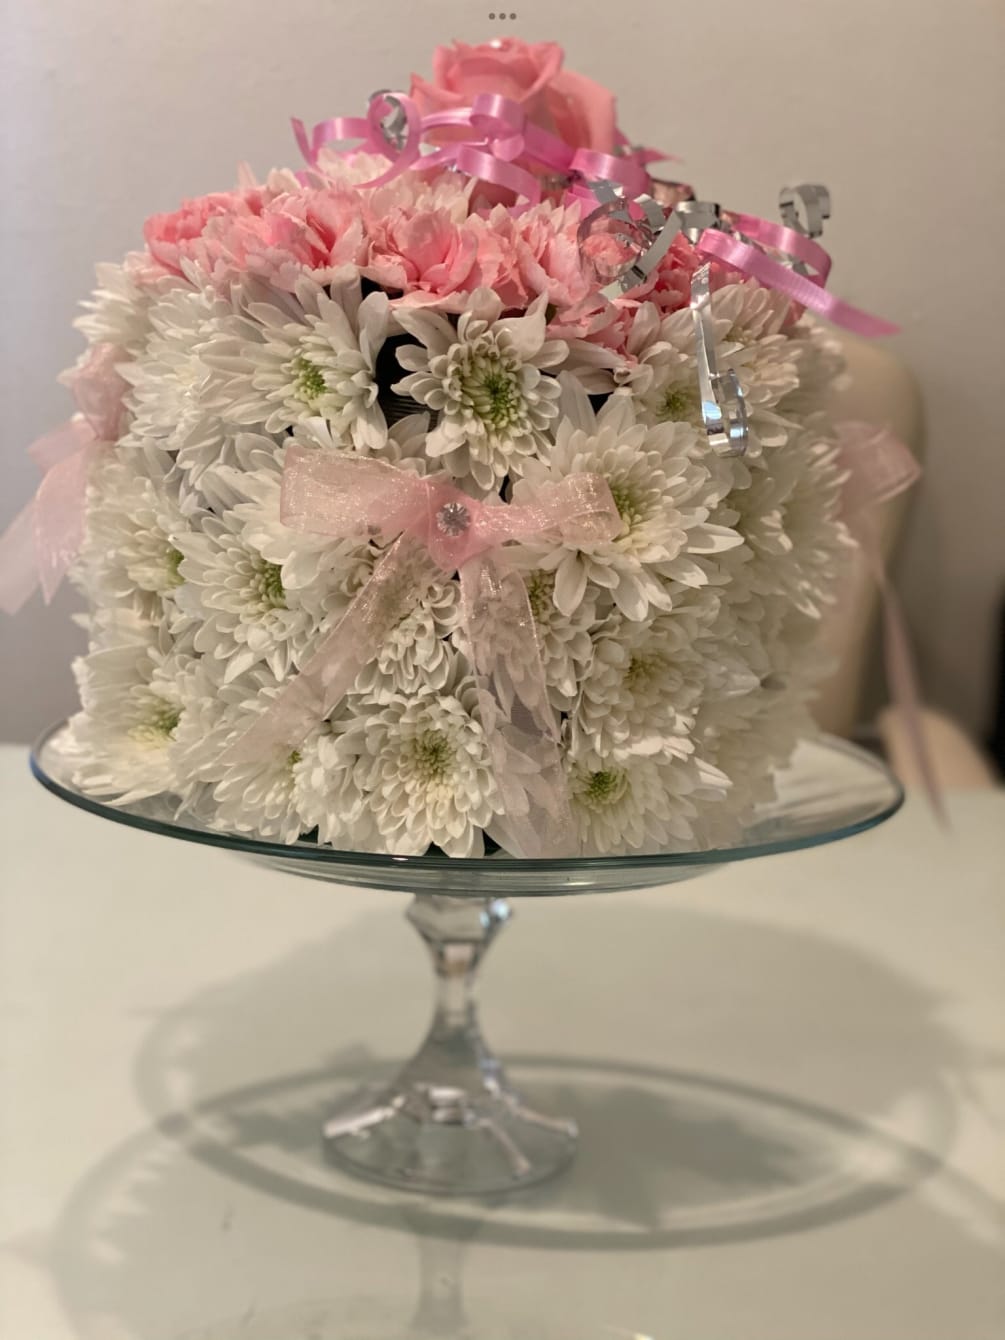 Flower cake on a beautiful glass cake stand